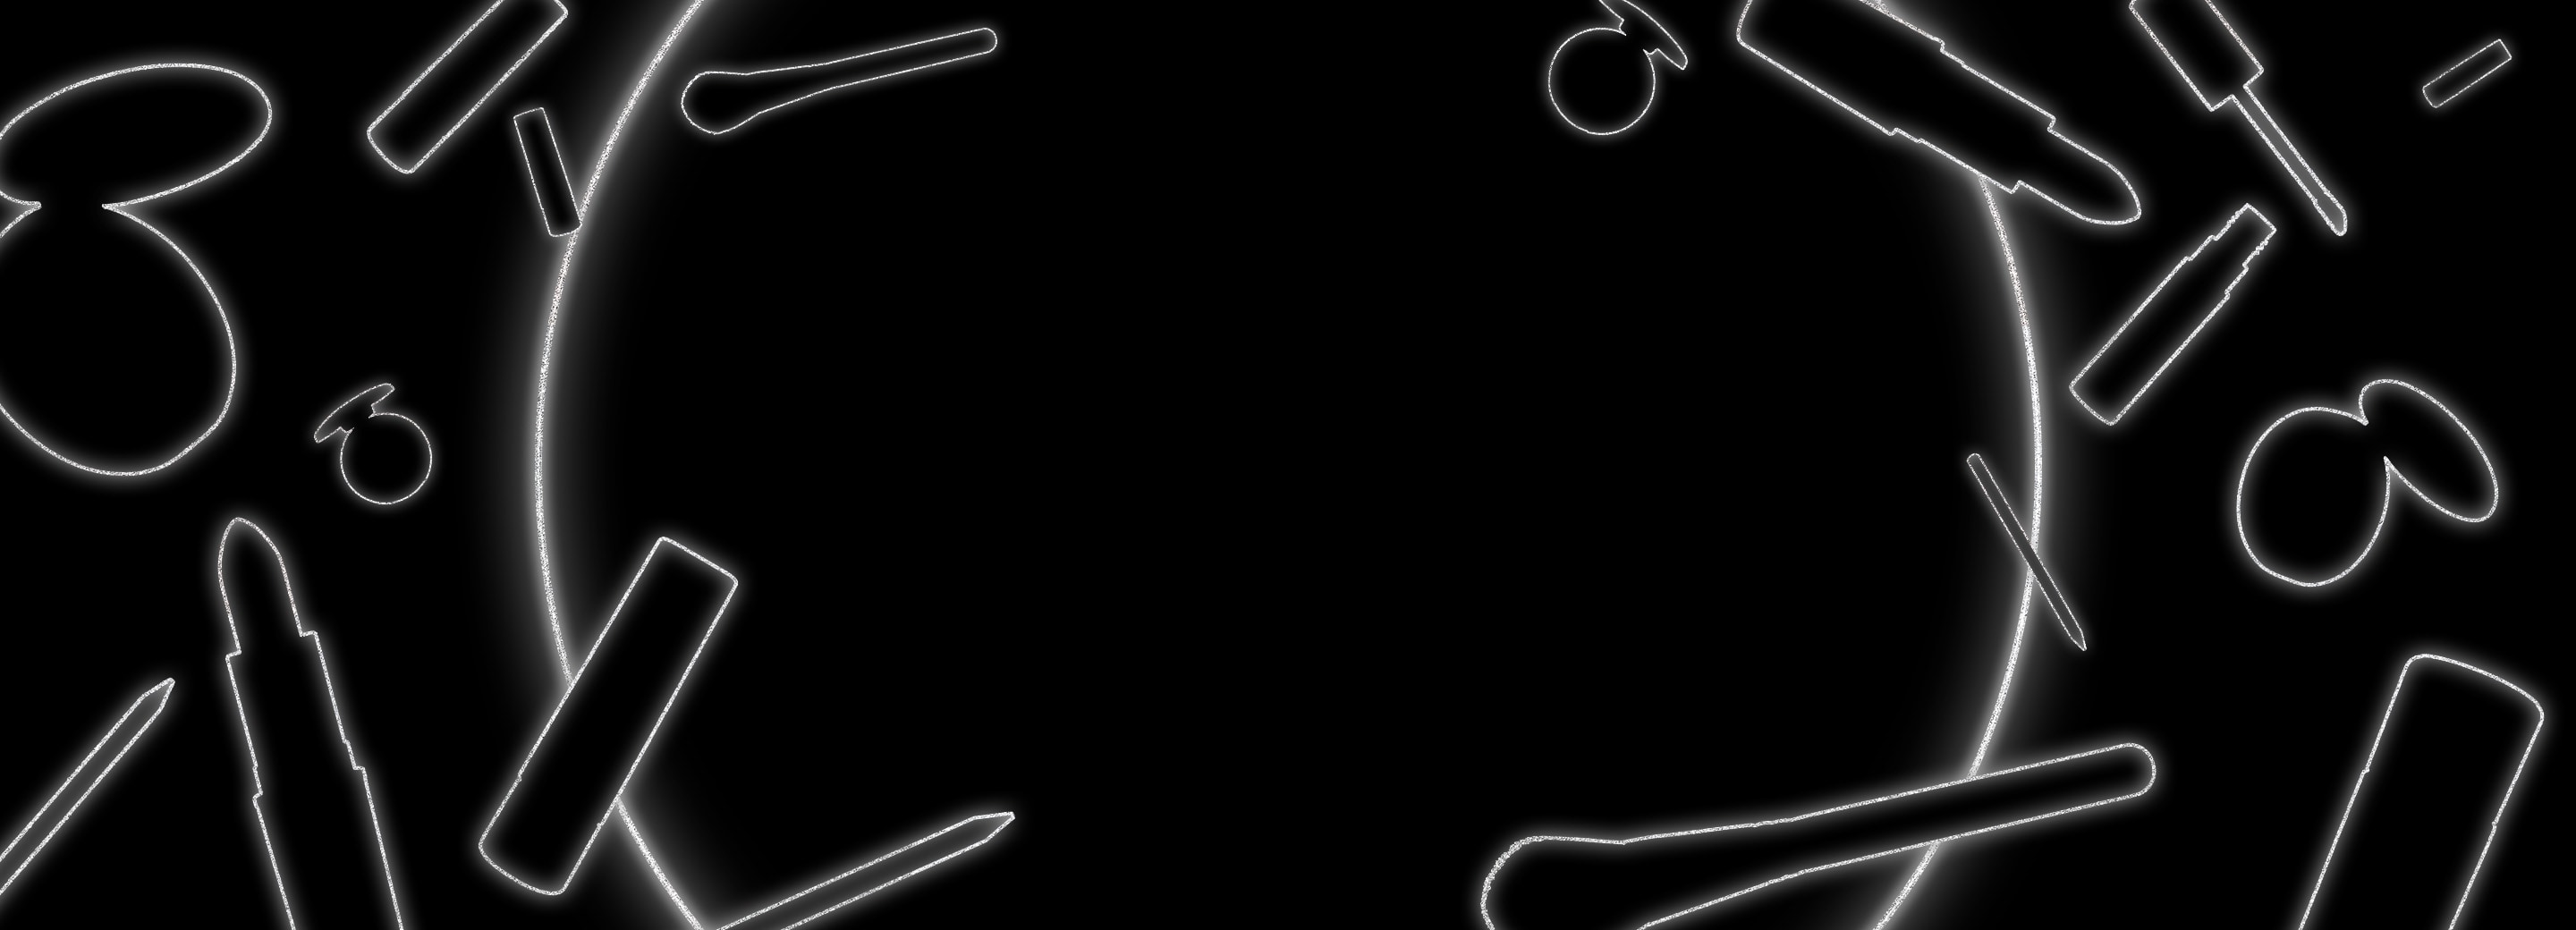 outline of MAC products on a black background